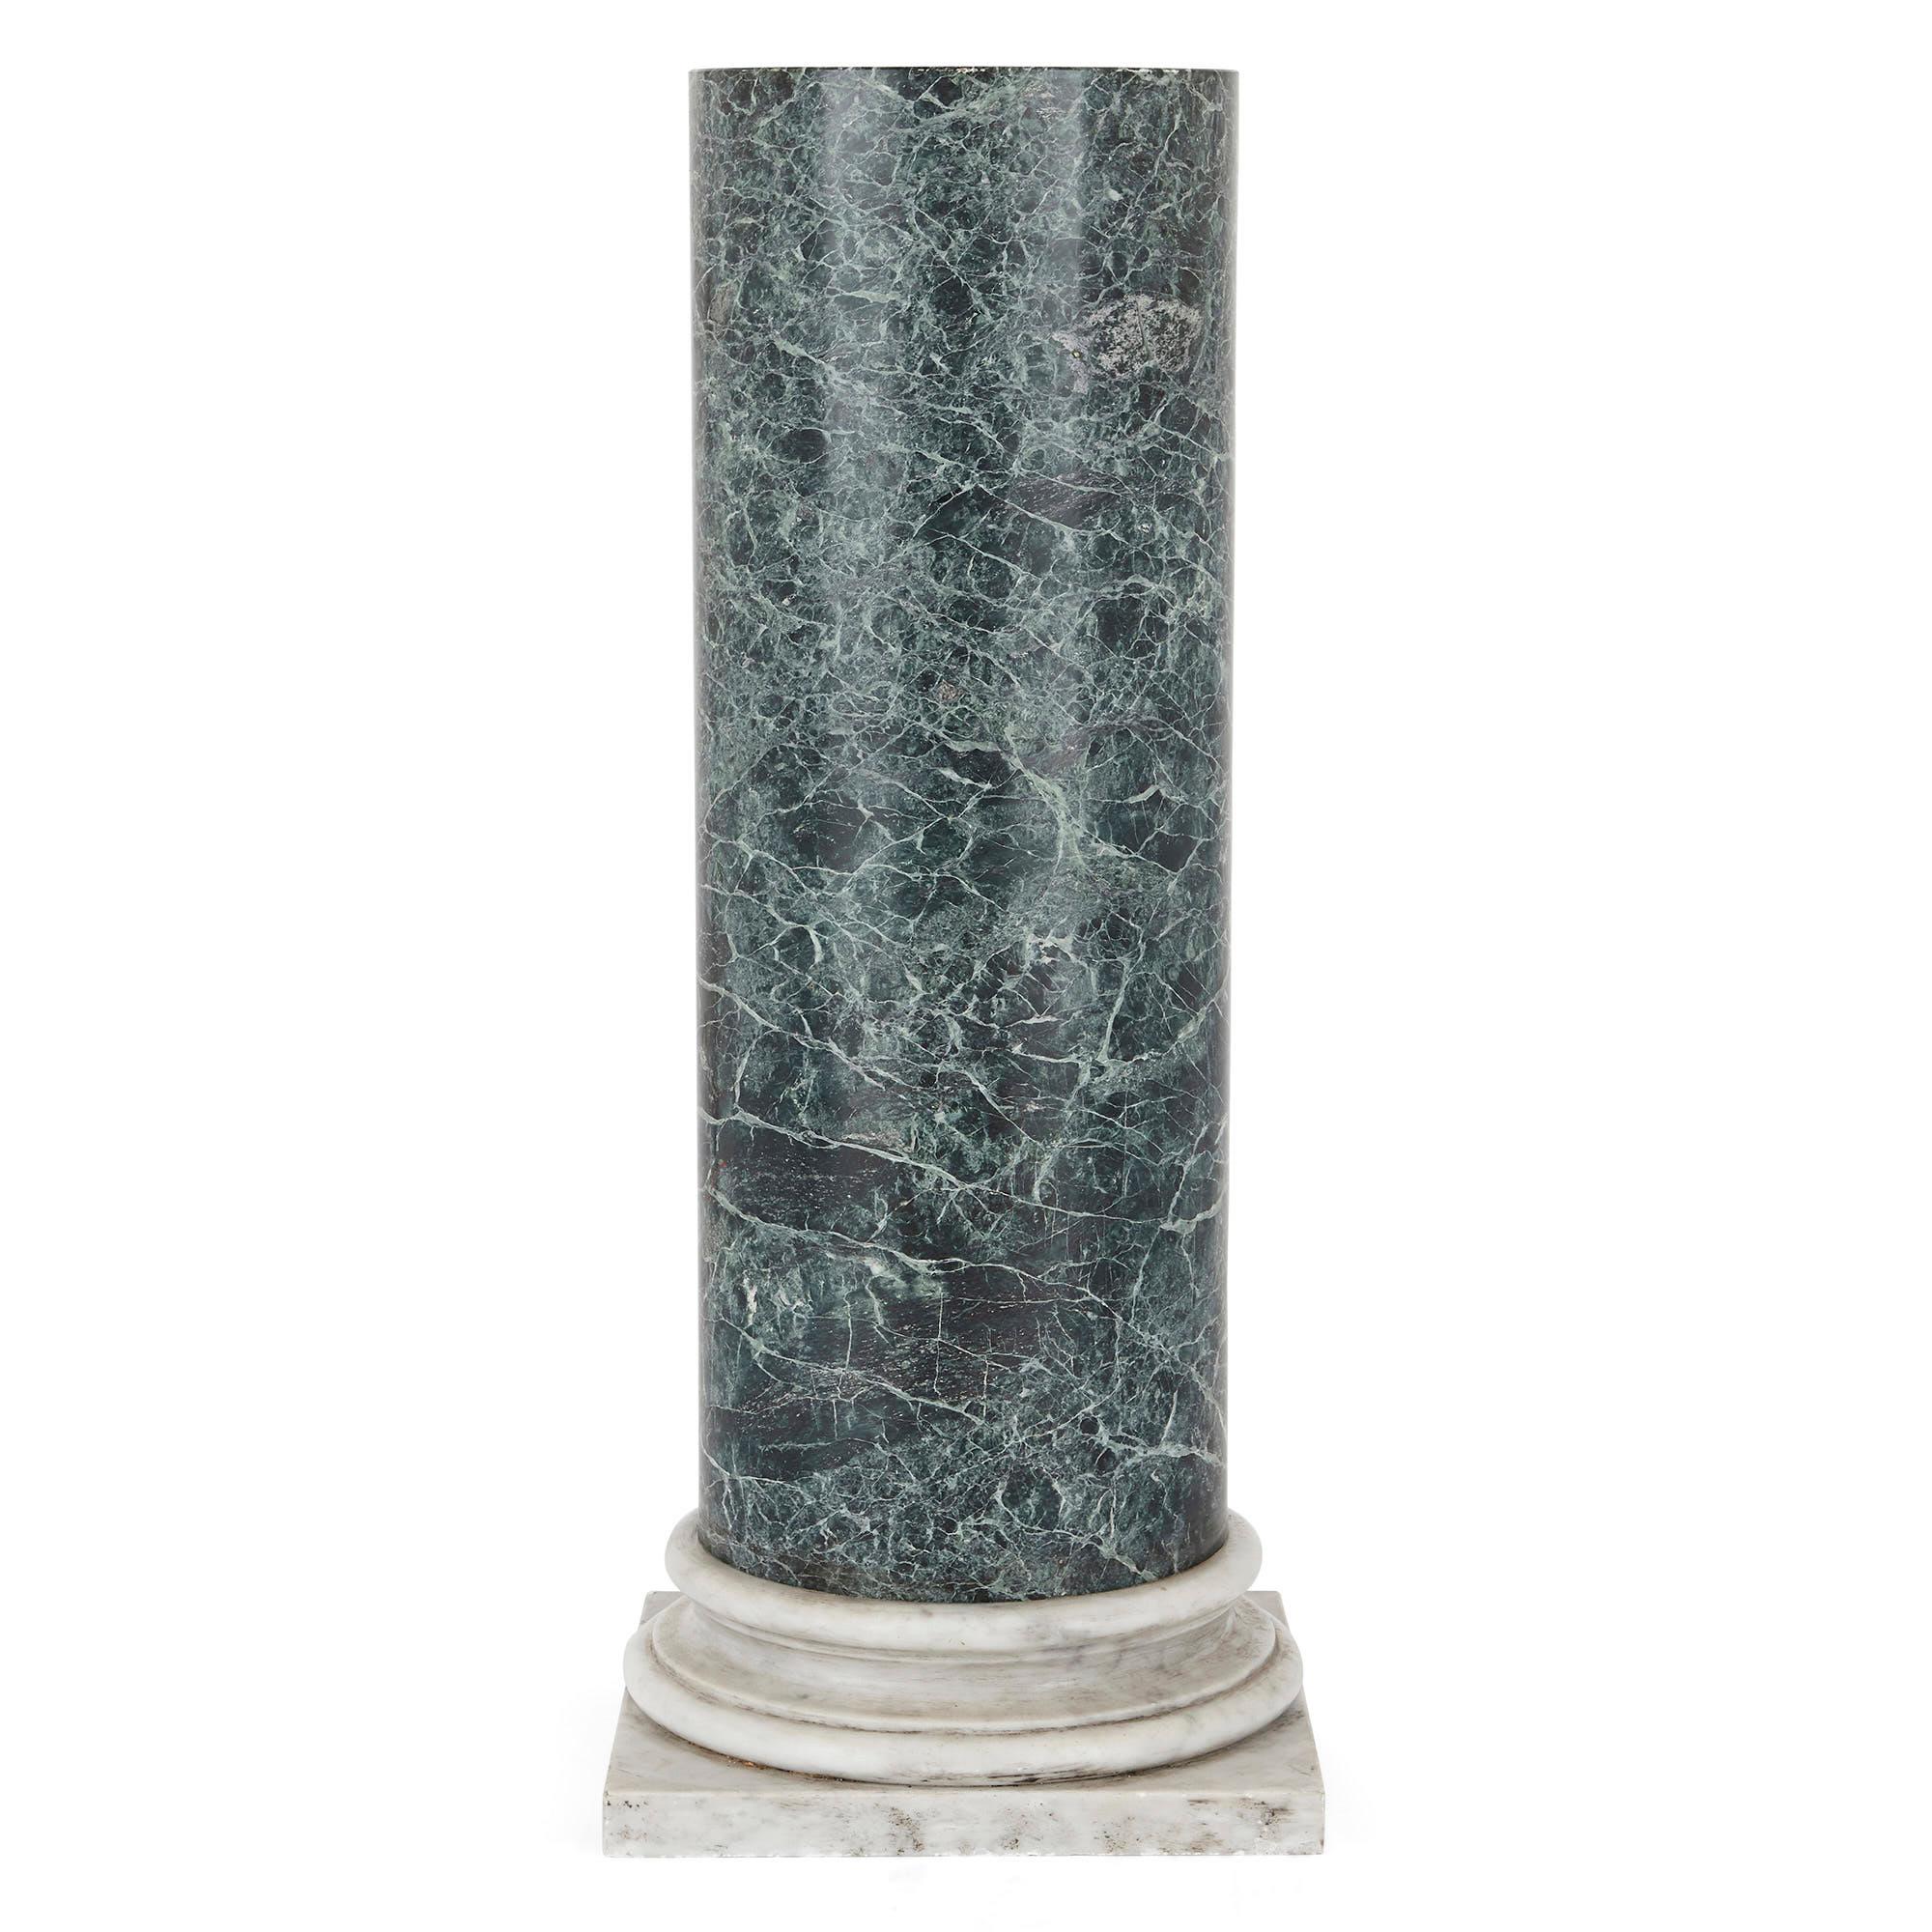 These beautiful pedestals were created in Italy in the 19th Century. They are designed in the style of classical Roman columns which are half-length. The items will make superb display stands for works of decorative or fine art, such as vases,